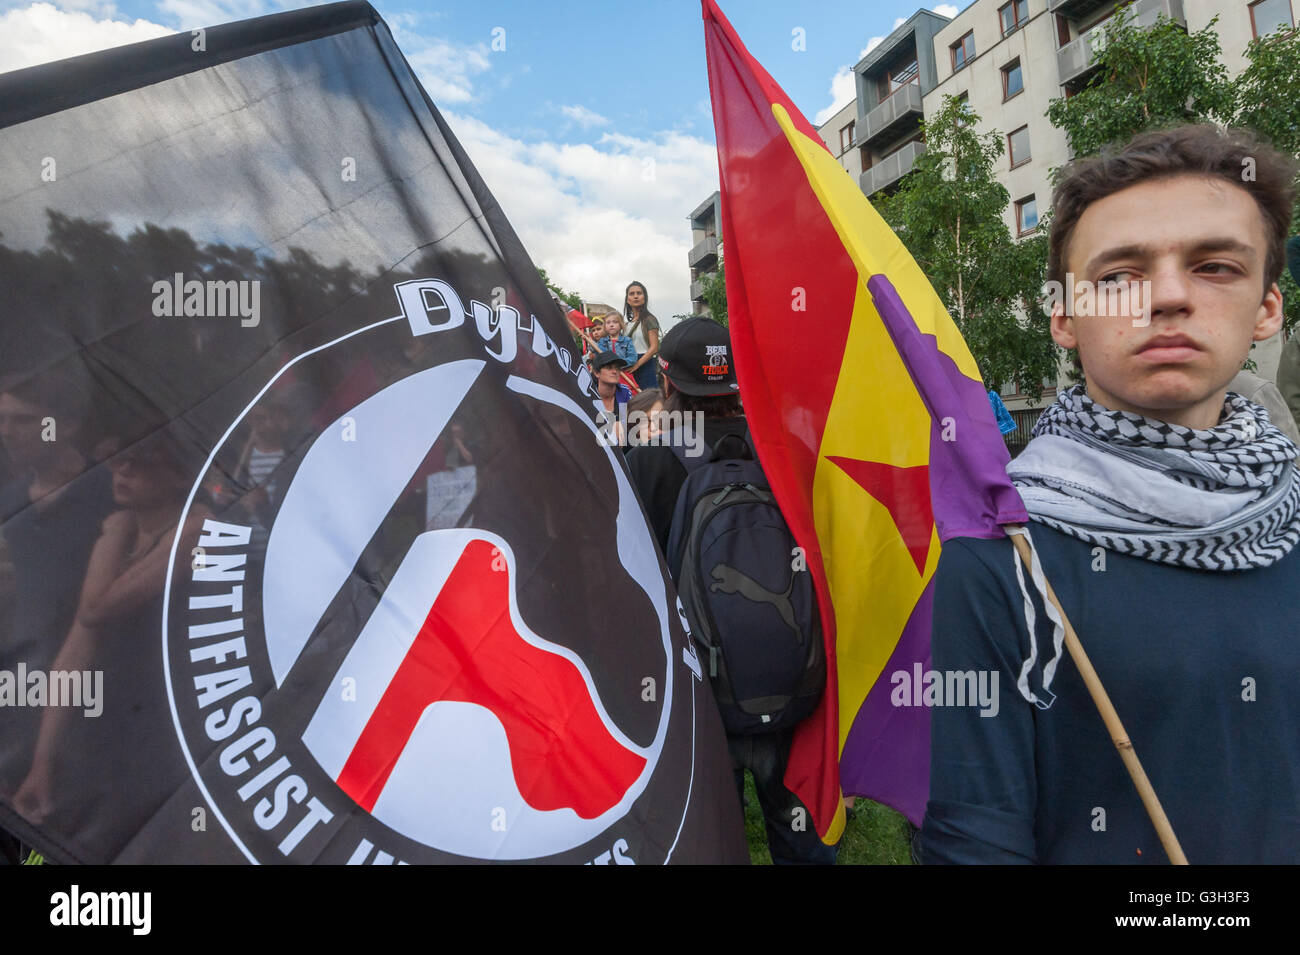 London, UK. June 24th 2016. Anti-fascist protesters with flags, including a Spanish Republican flag at the rally in Altab Ali Park on the day after the UK voted to leave the EU against racism, for migrant rights and against fascist violence. They say that migration and immigrants have been attacked and scapegoated not only by both Remain and Leave campaigns but by mainstream parties and media over more than 20 years, stoking up hatred by insisting immigrants are a 'problem'.Peter Marshall/Alamy Live News Stock Photo